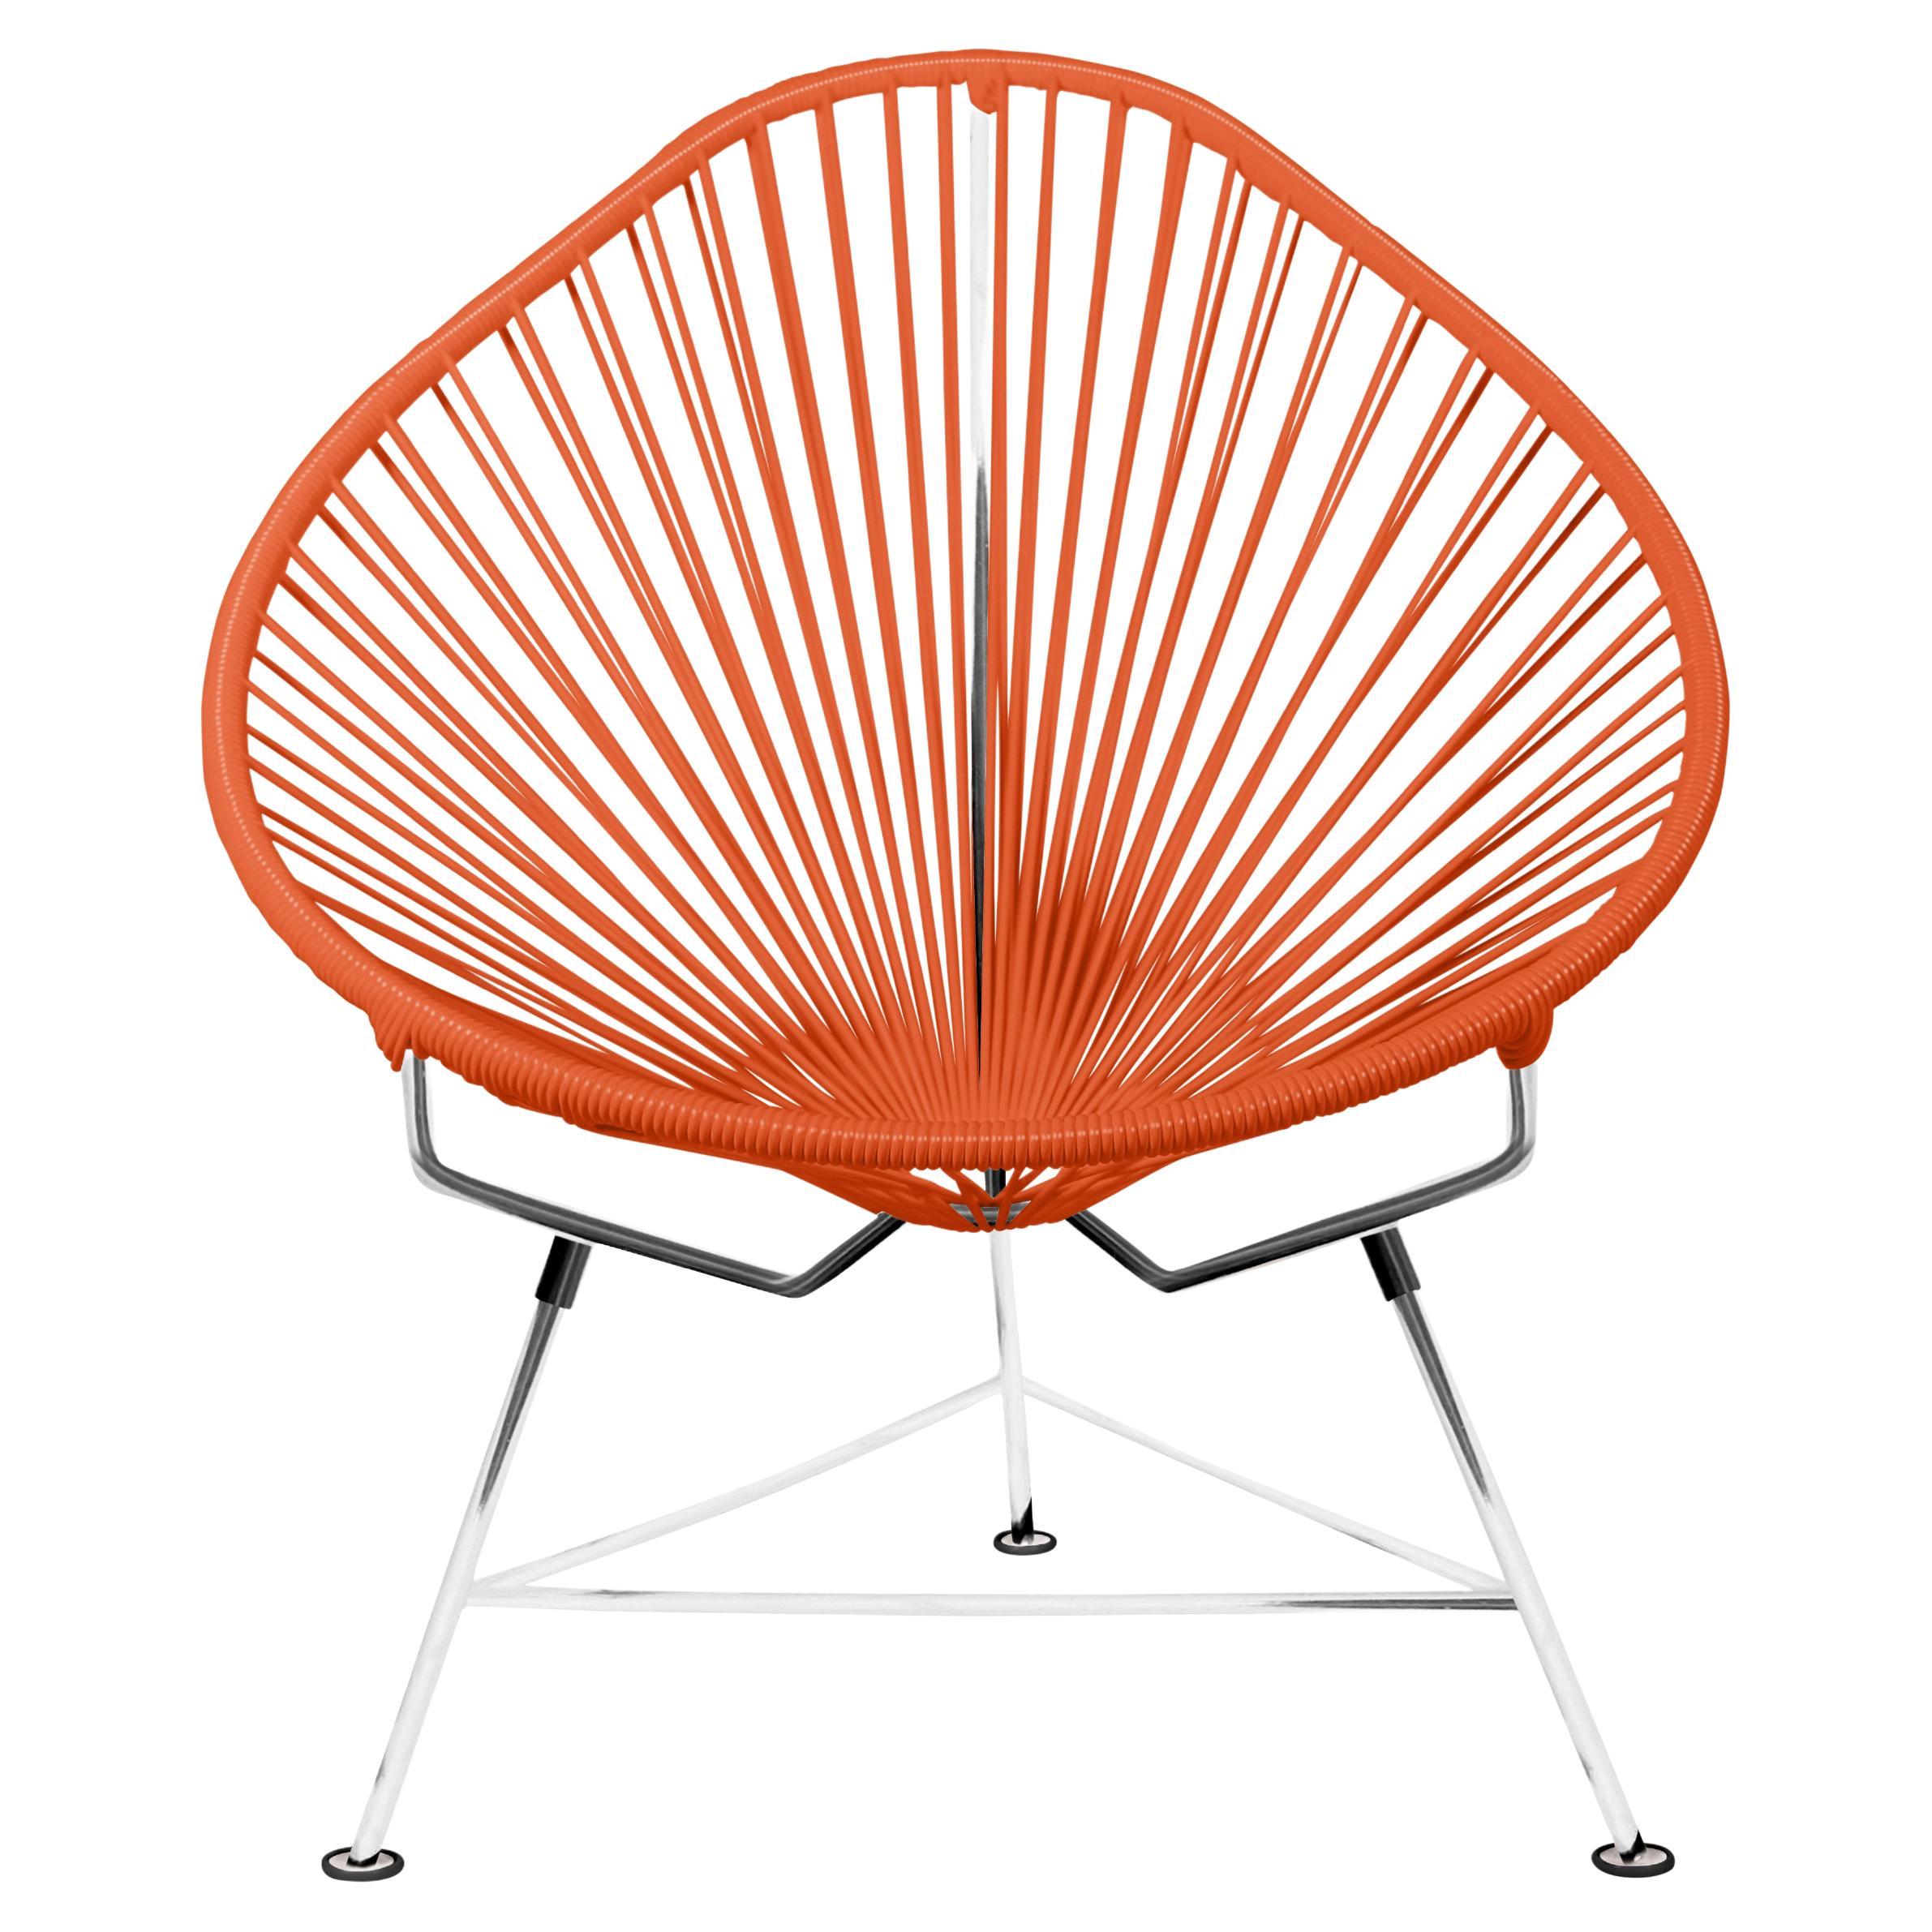 Innit Designs Acapulco Chair Orange Weave on Chrome Frame For Sale